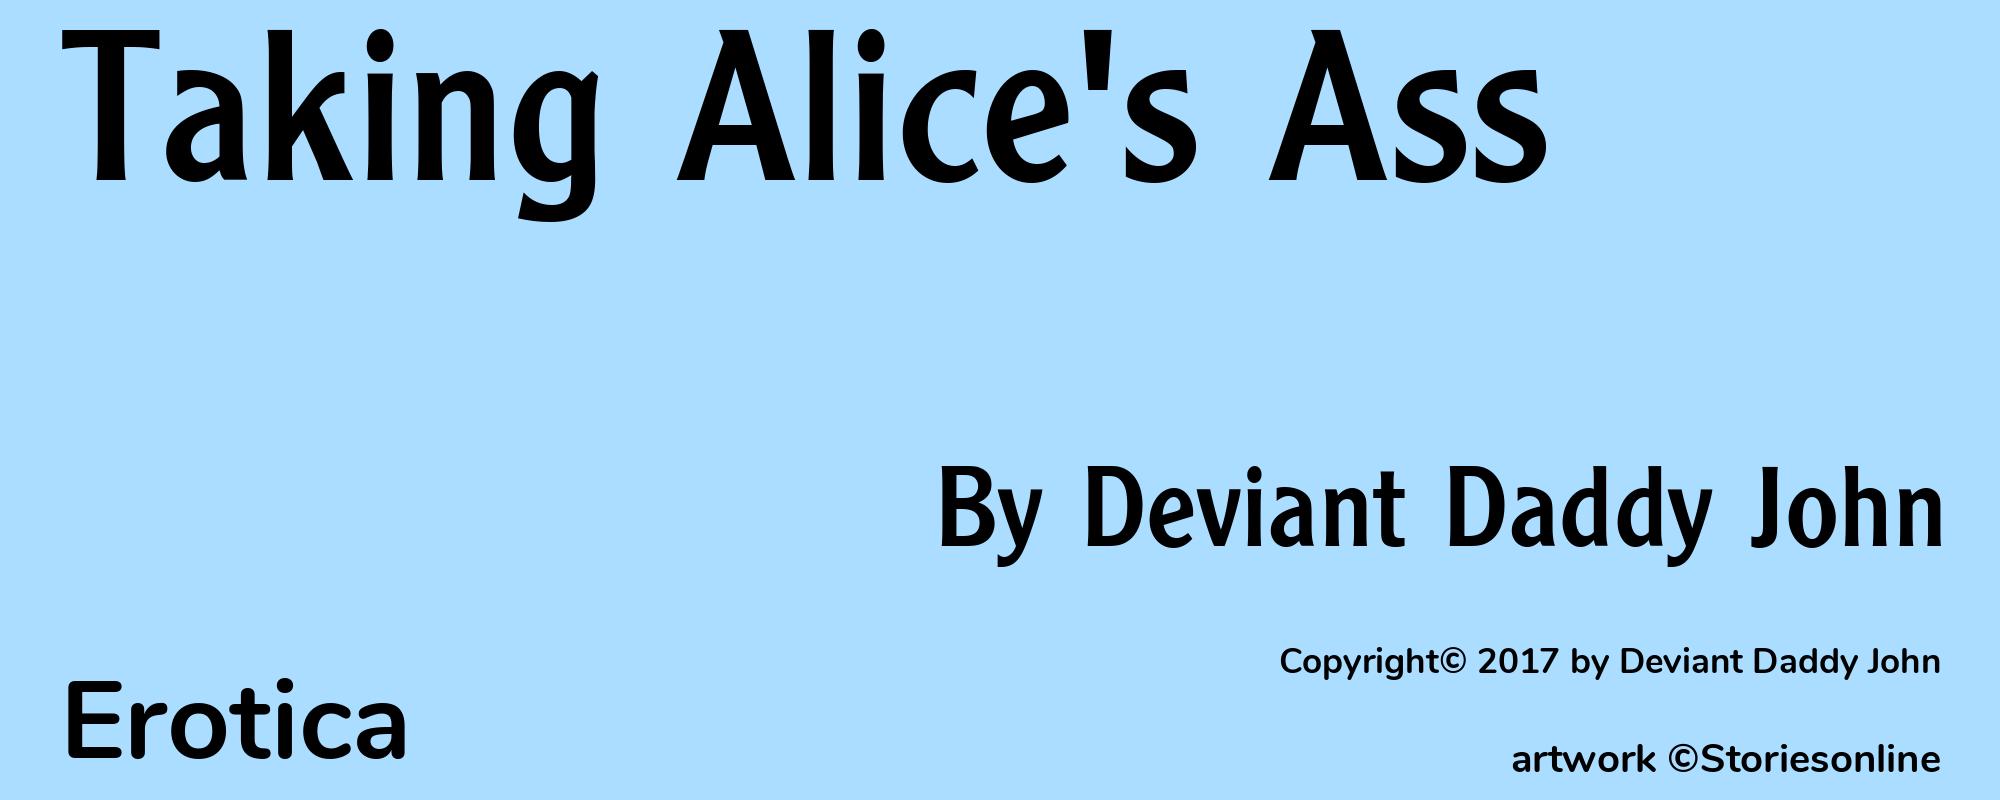 Taking Alice's Ass - Cover